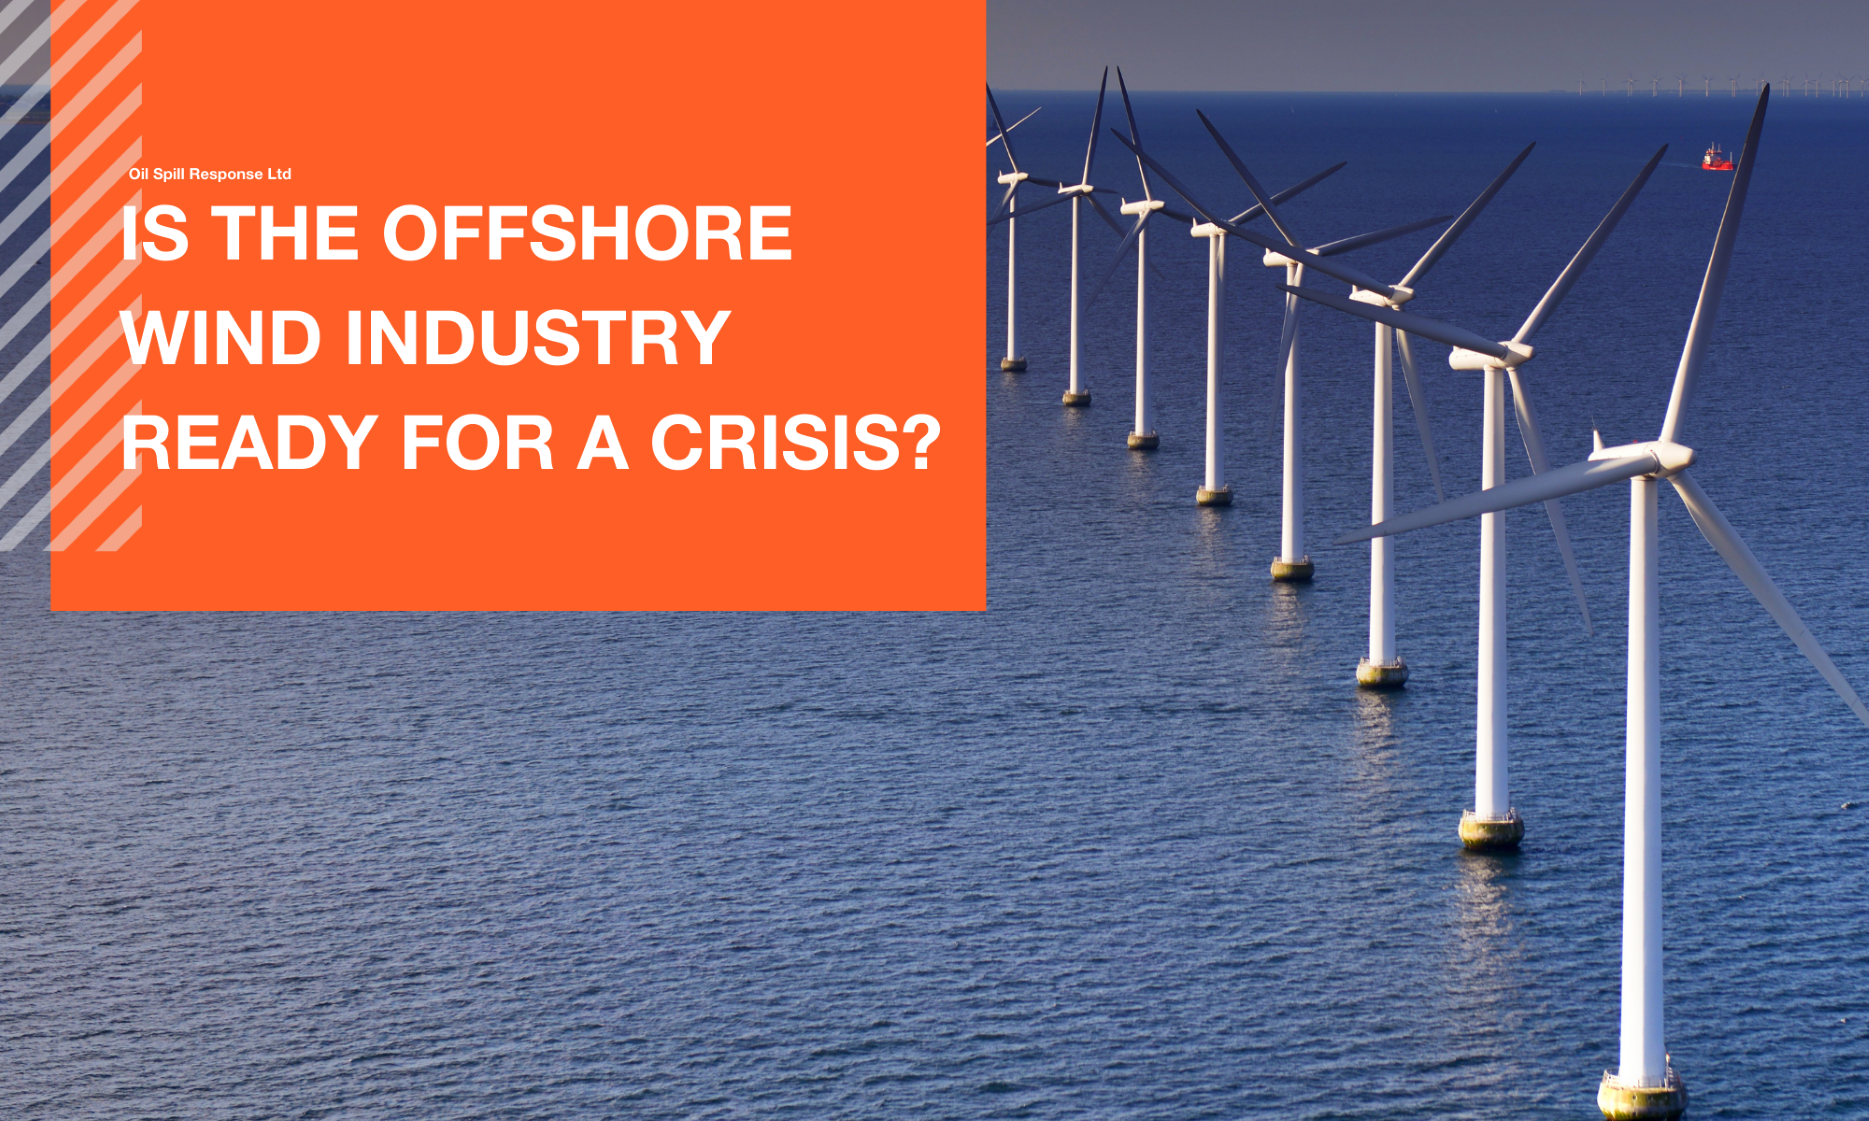 Is the offshore wind industry ready for a crisis?